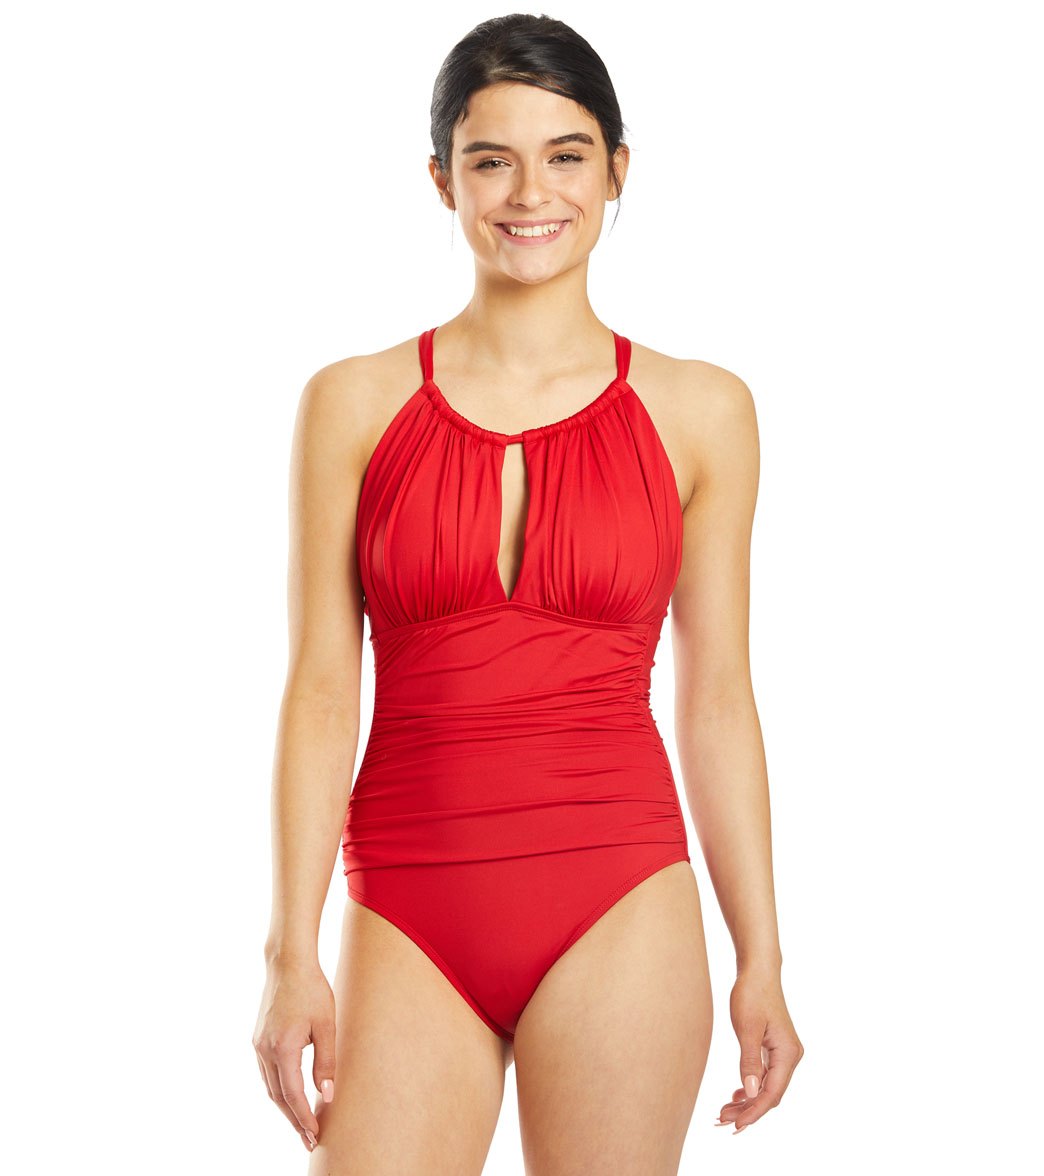 Kenneth Cole Core Power High Neck Shirred One Piece Swimsuit - Red X-Small - Swimoutlet.com